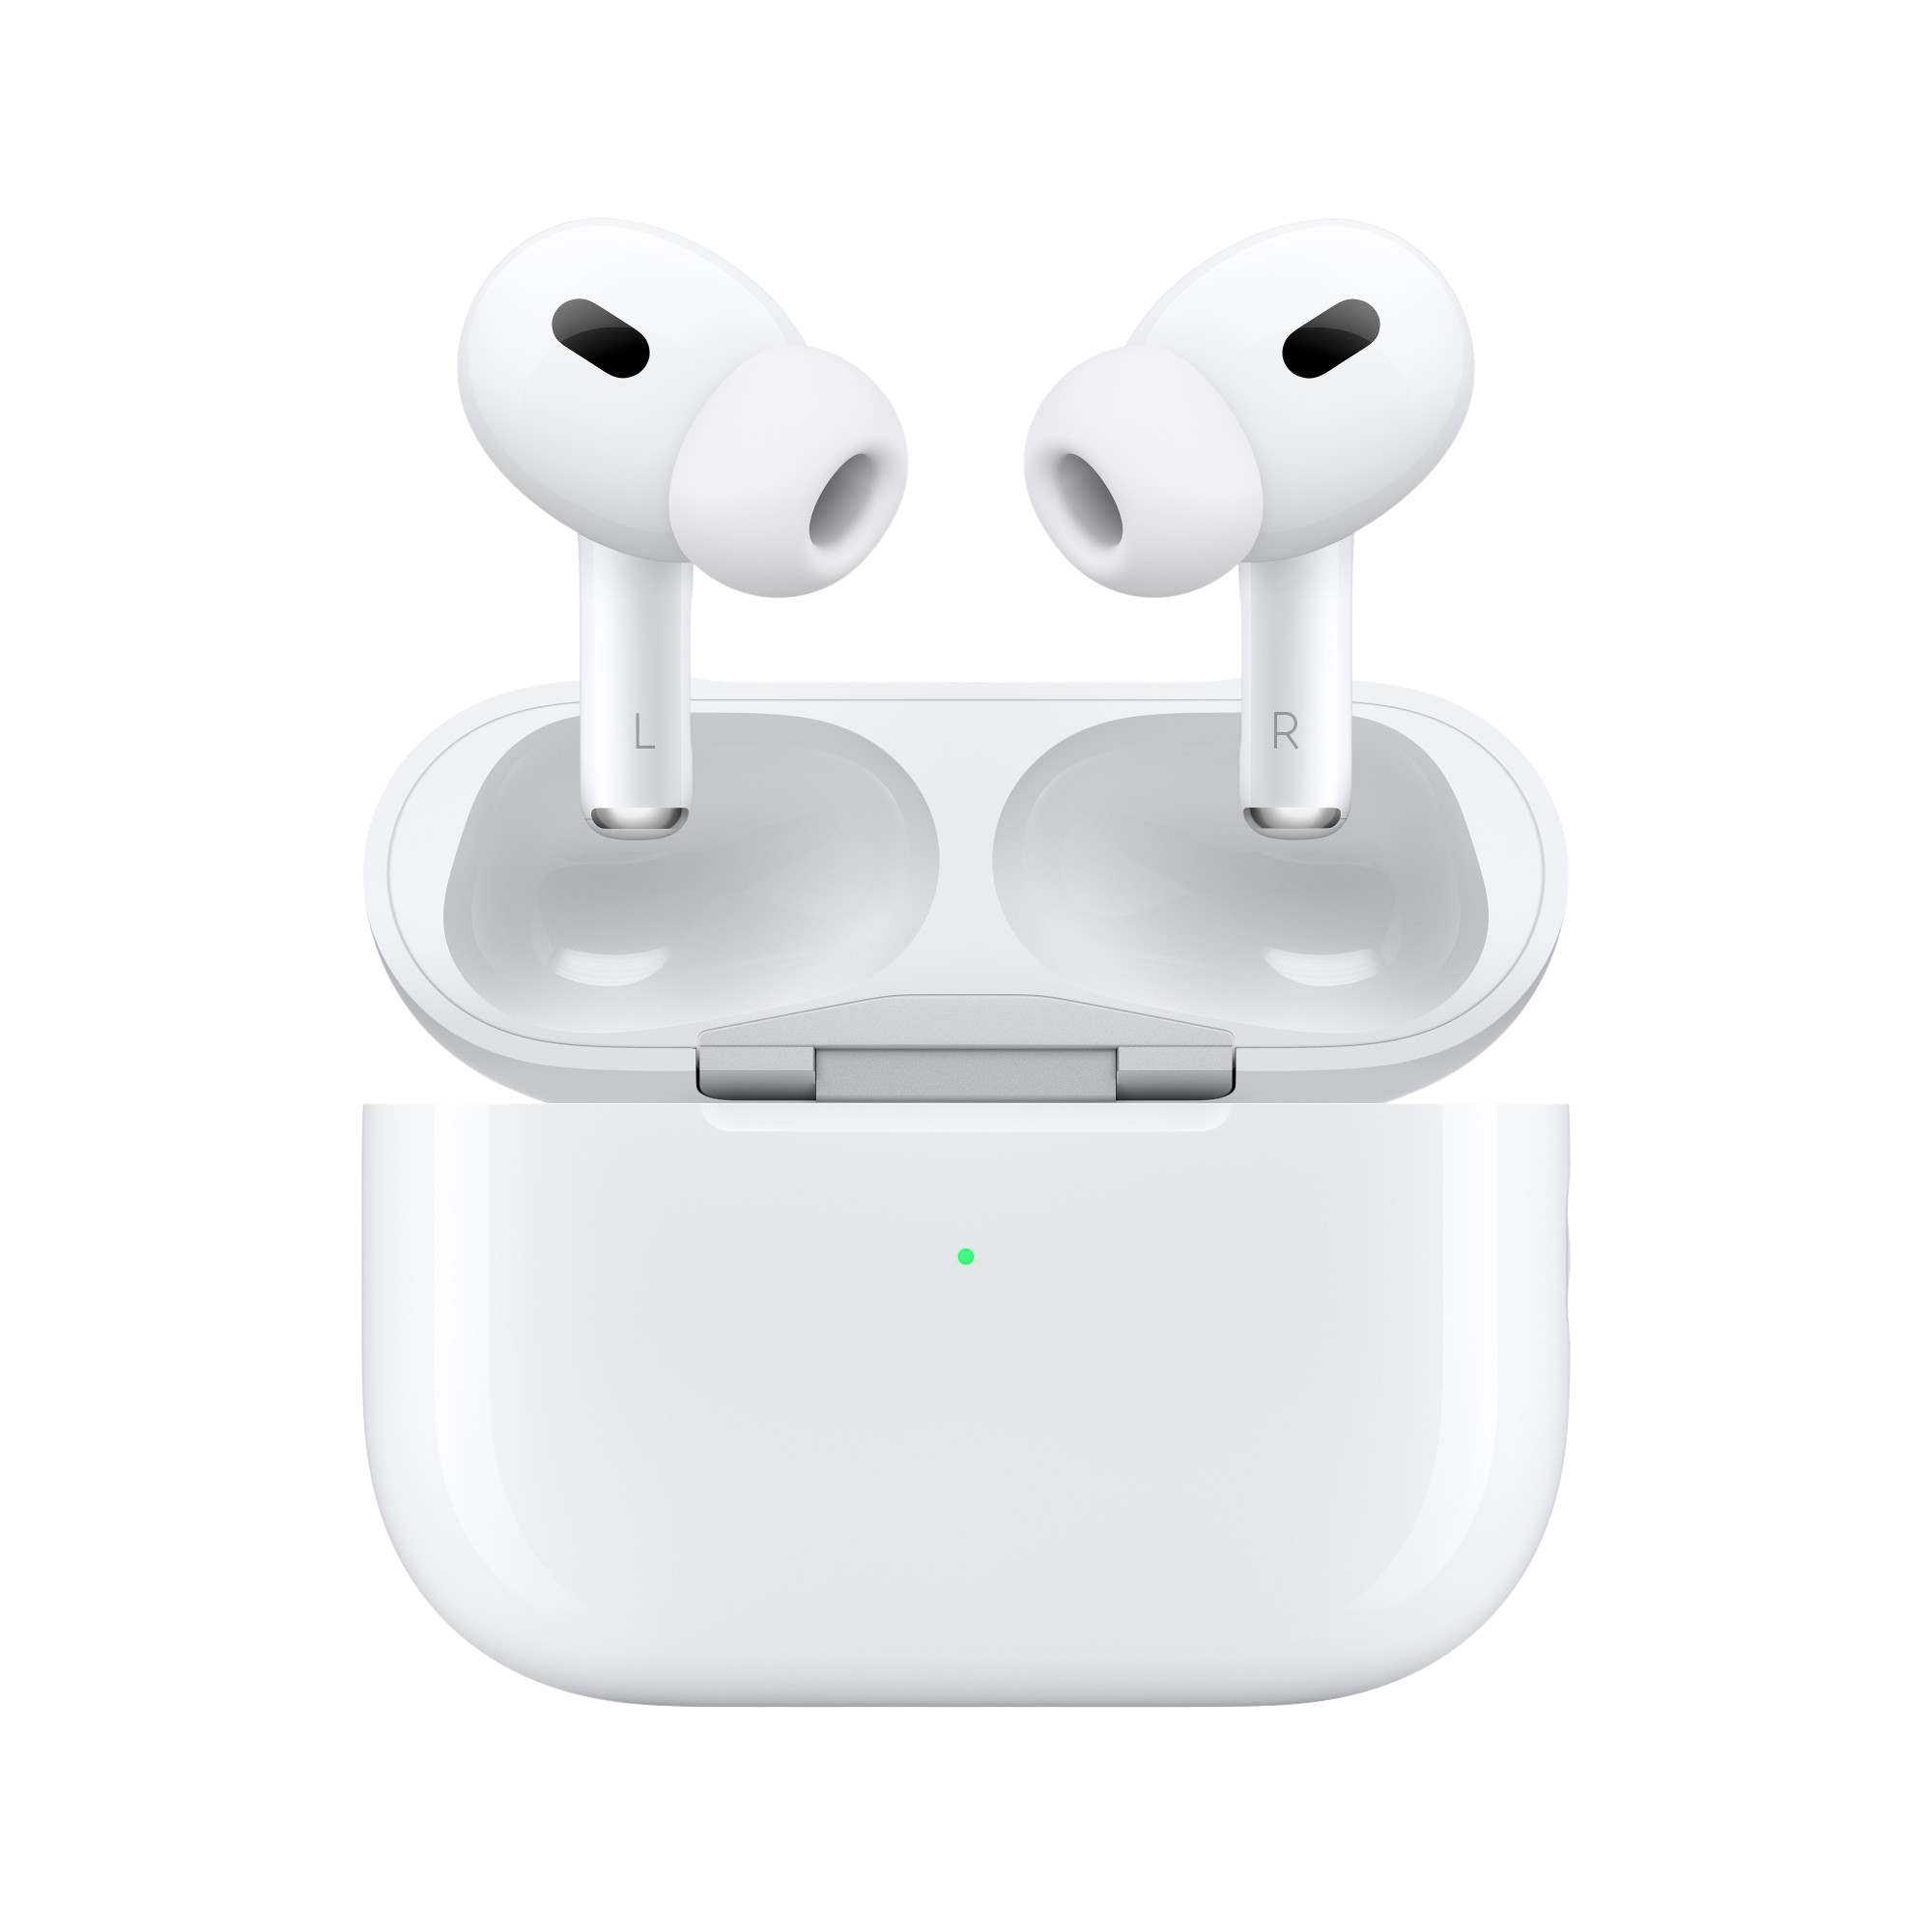 Apple Airpods Pro 2 with USB-C In-ear Bluetooth Headphones